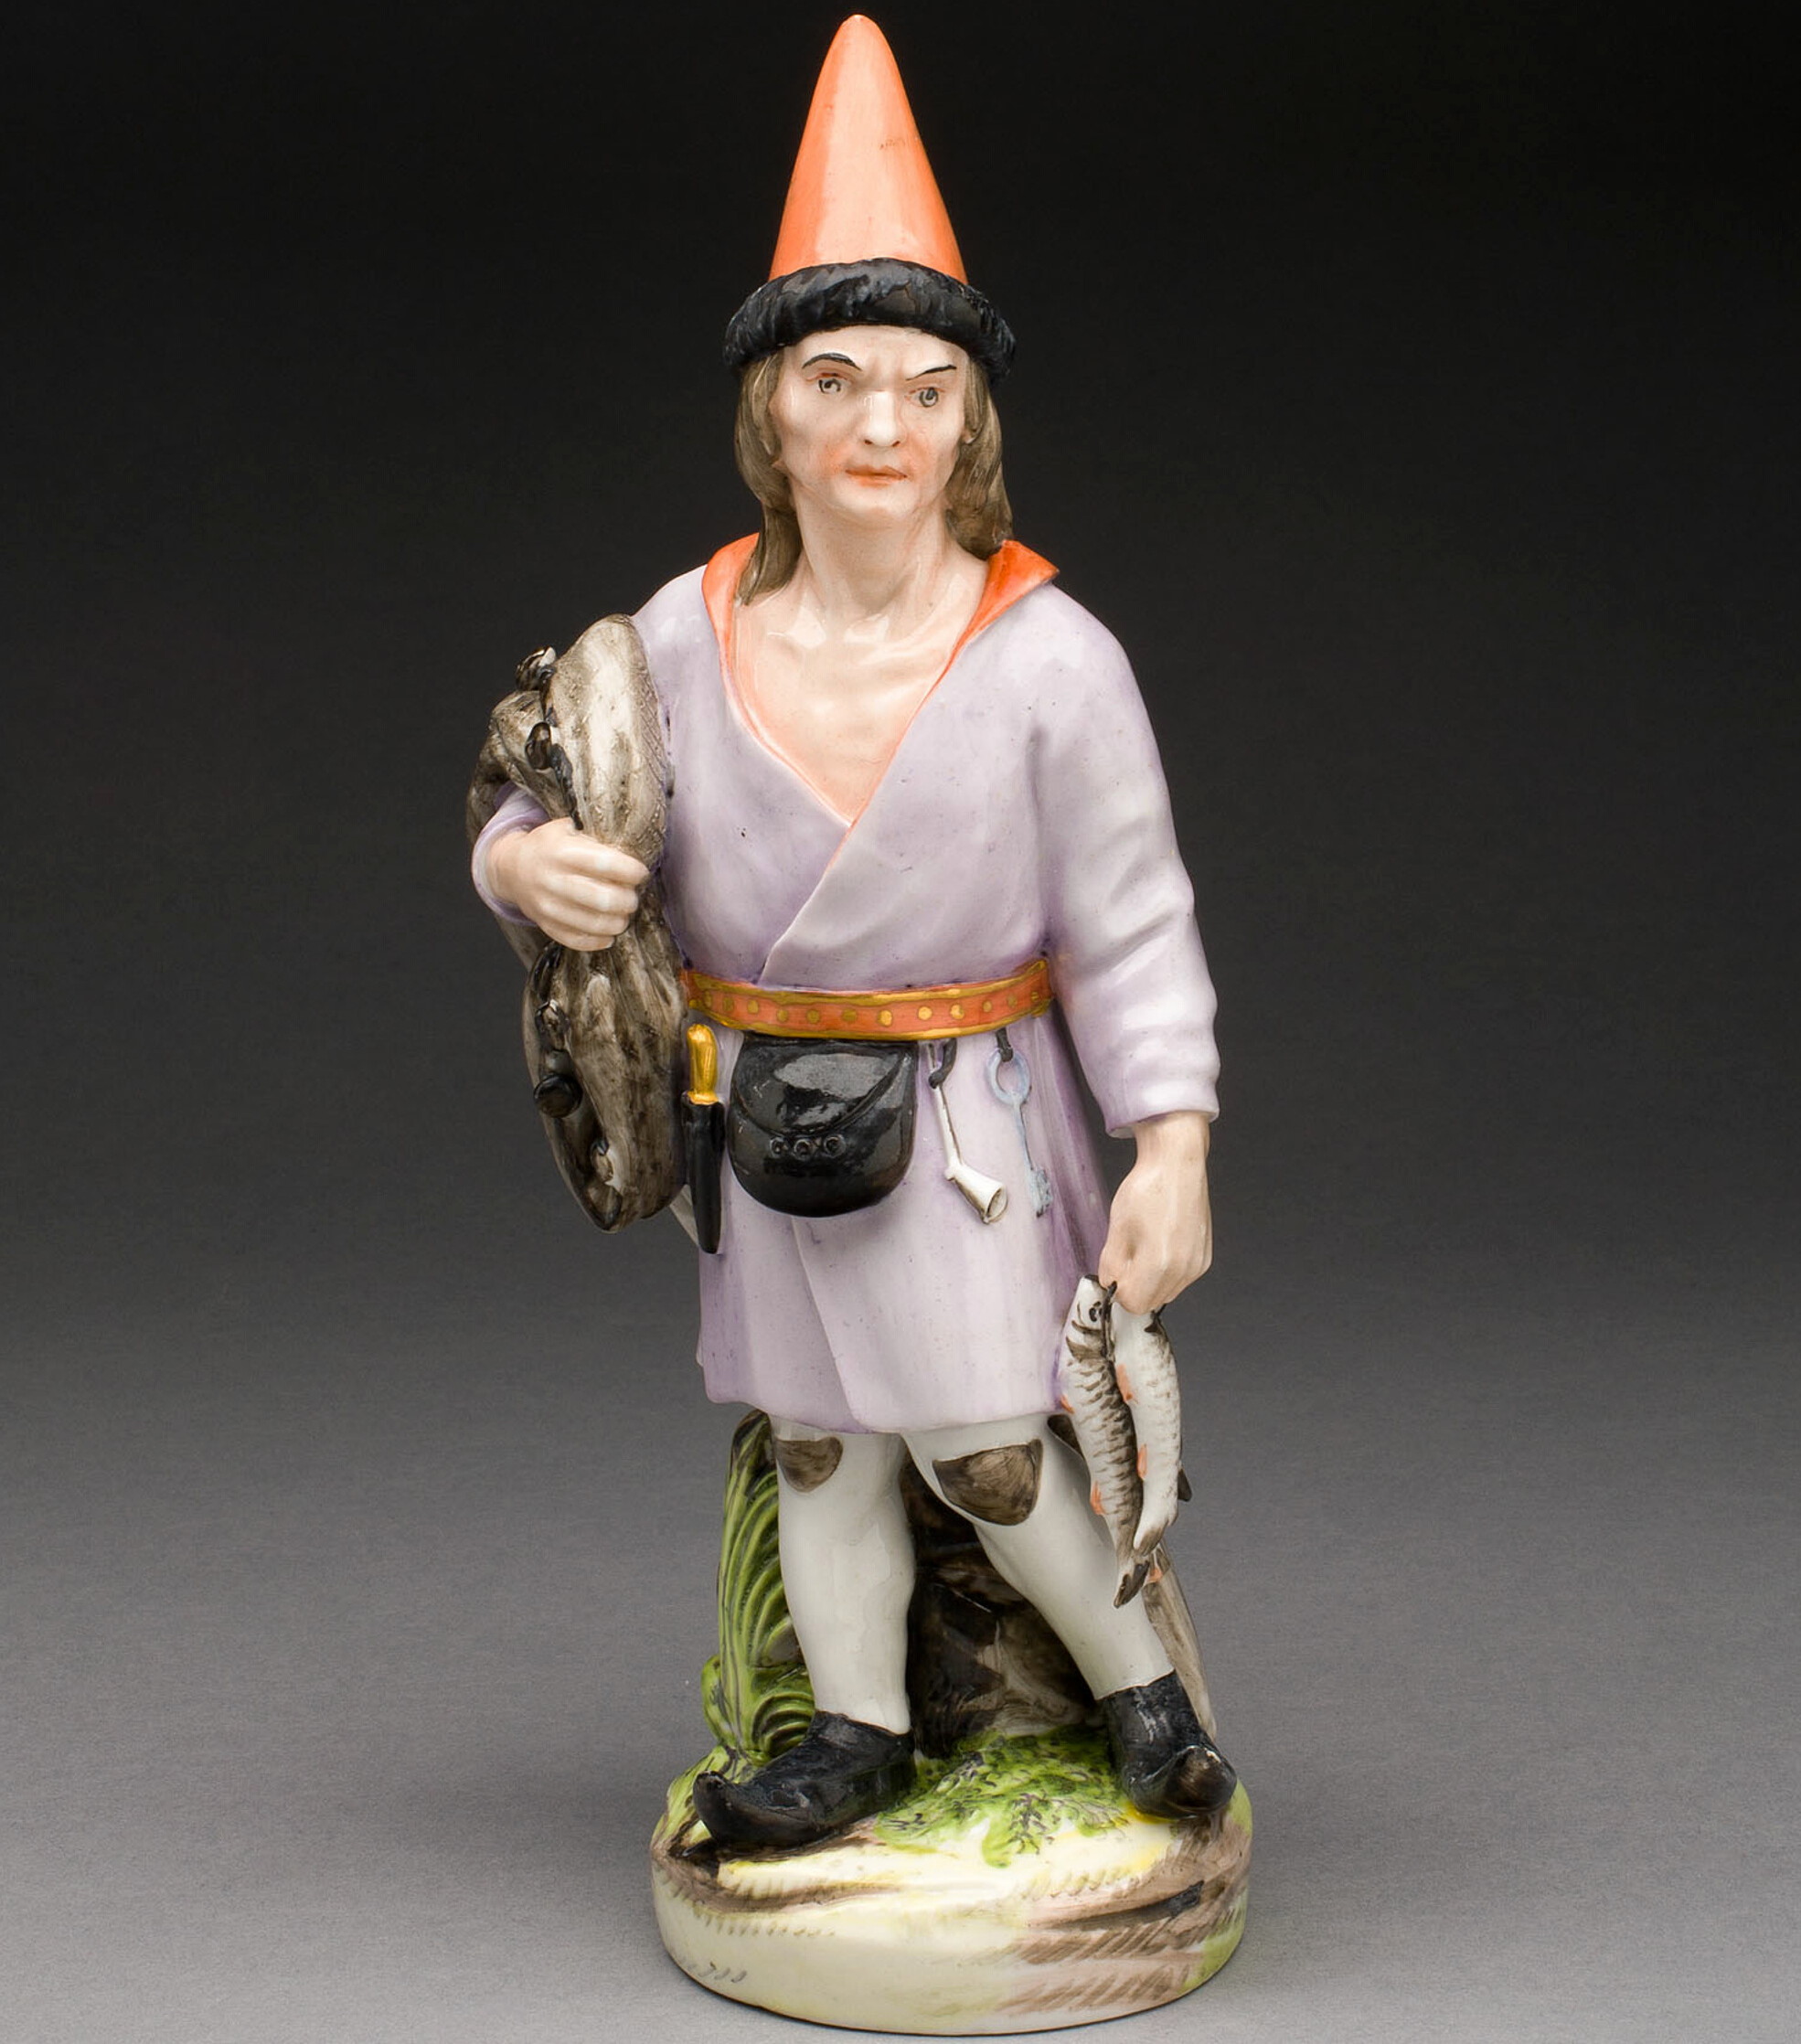 Russian Imperial Porcelain figure Laplander / Lopar by Rachette from "People of Russia" series